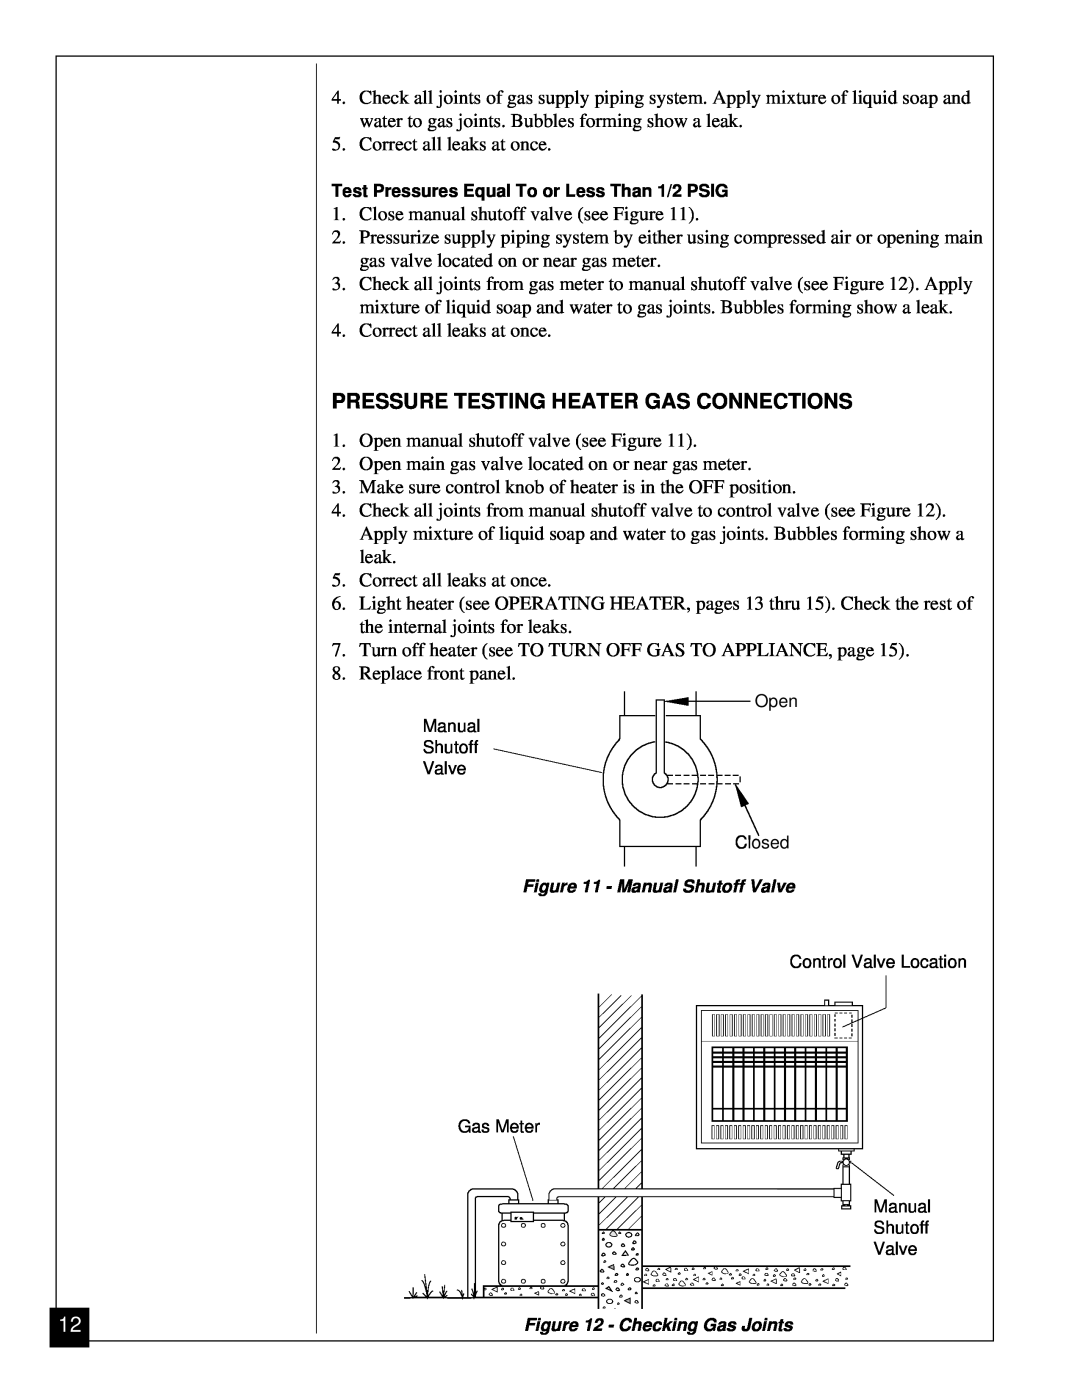 Vanguard Heating VGN30 installation manual Pressure Testing Heater Gas Connections 